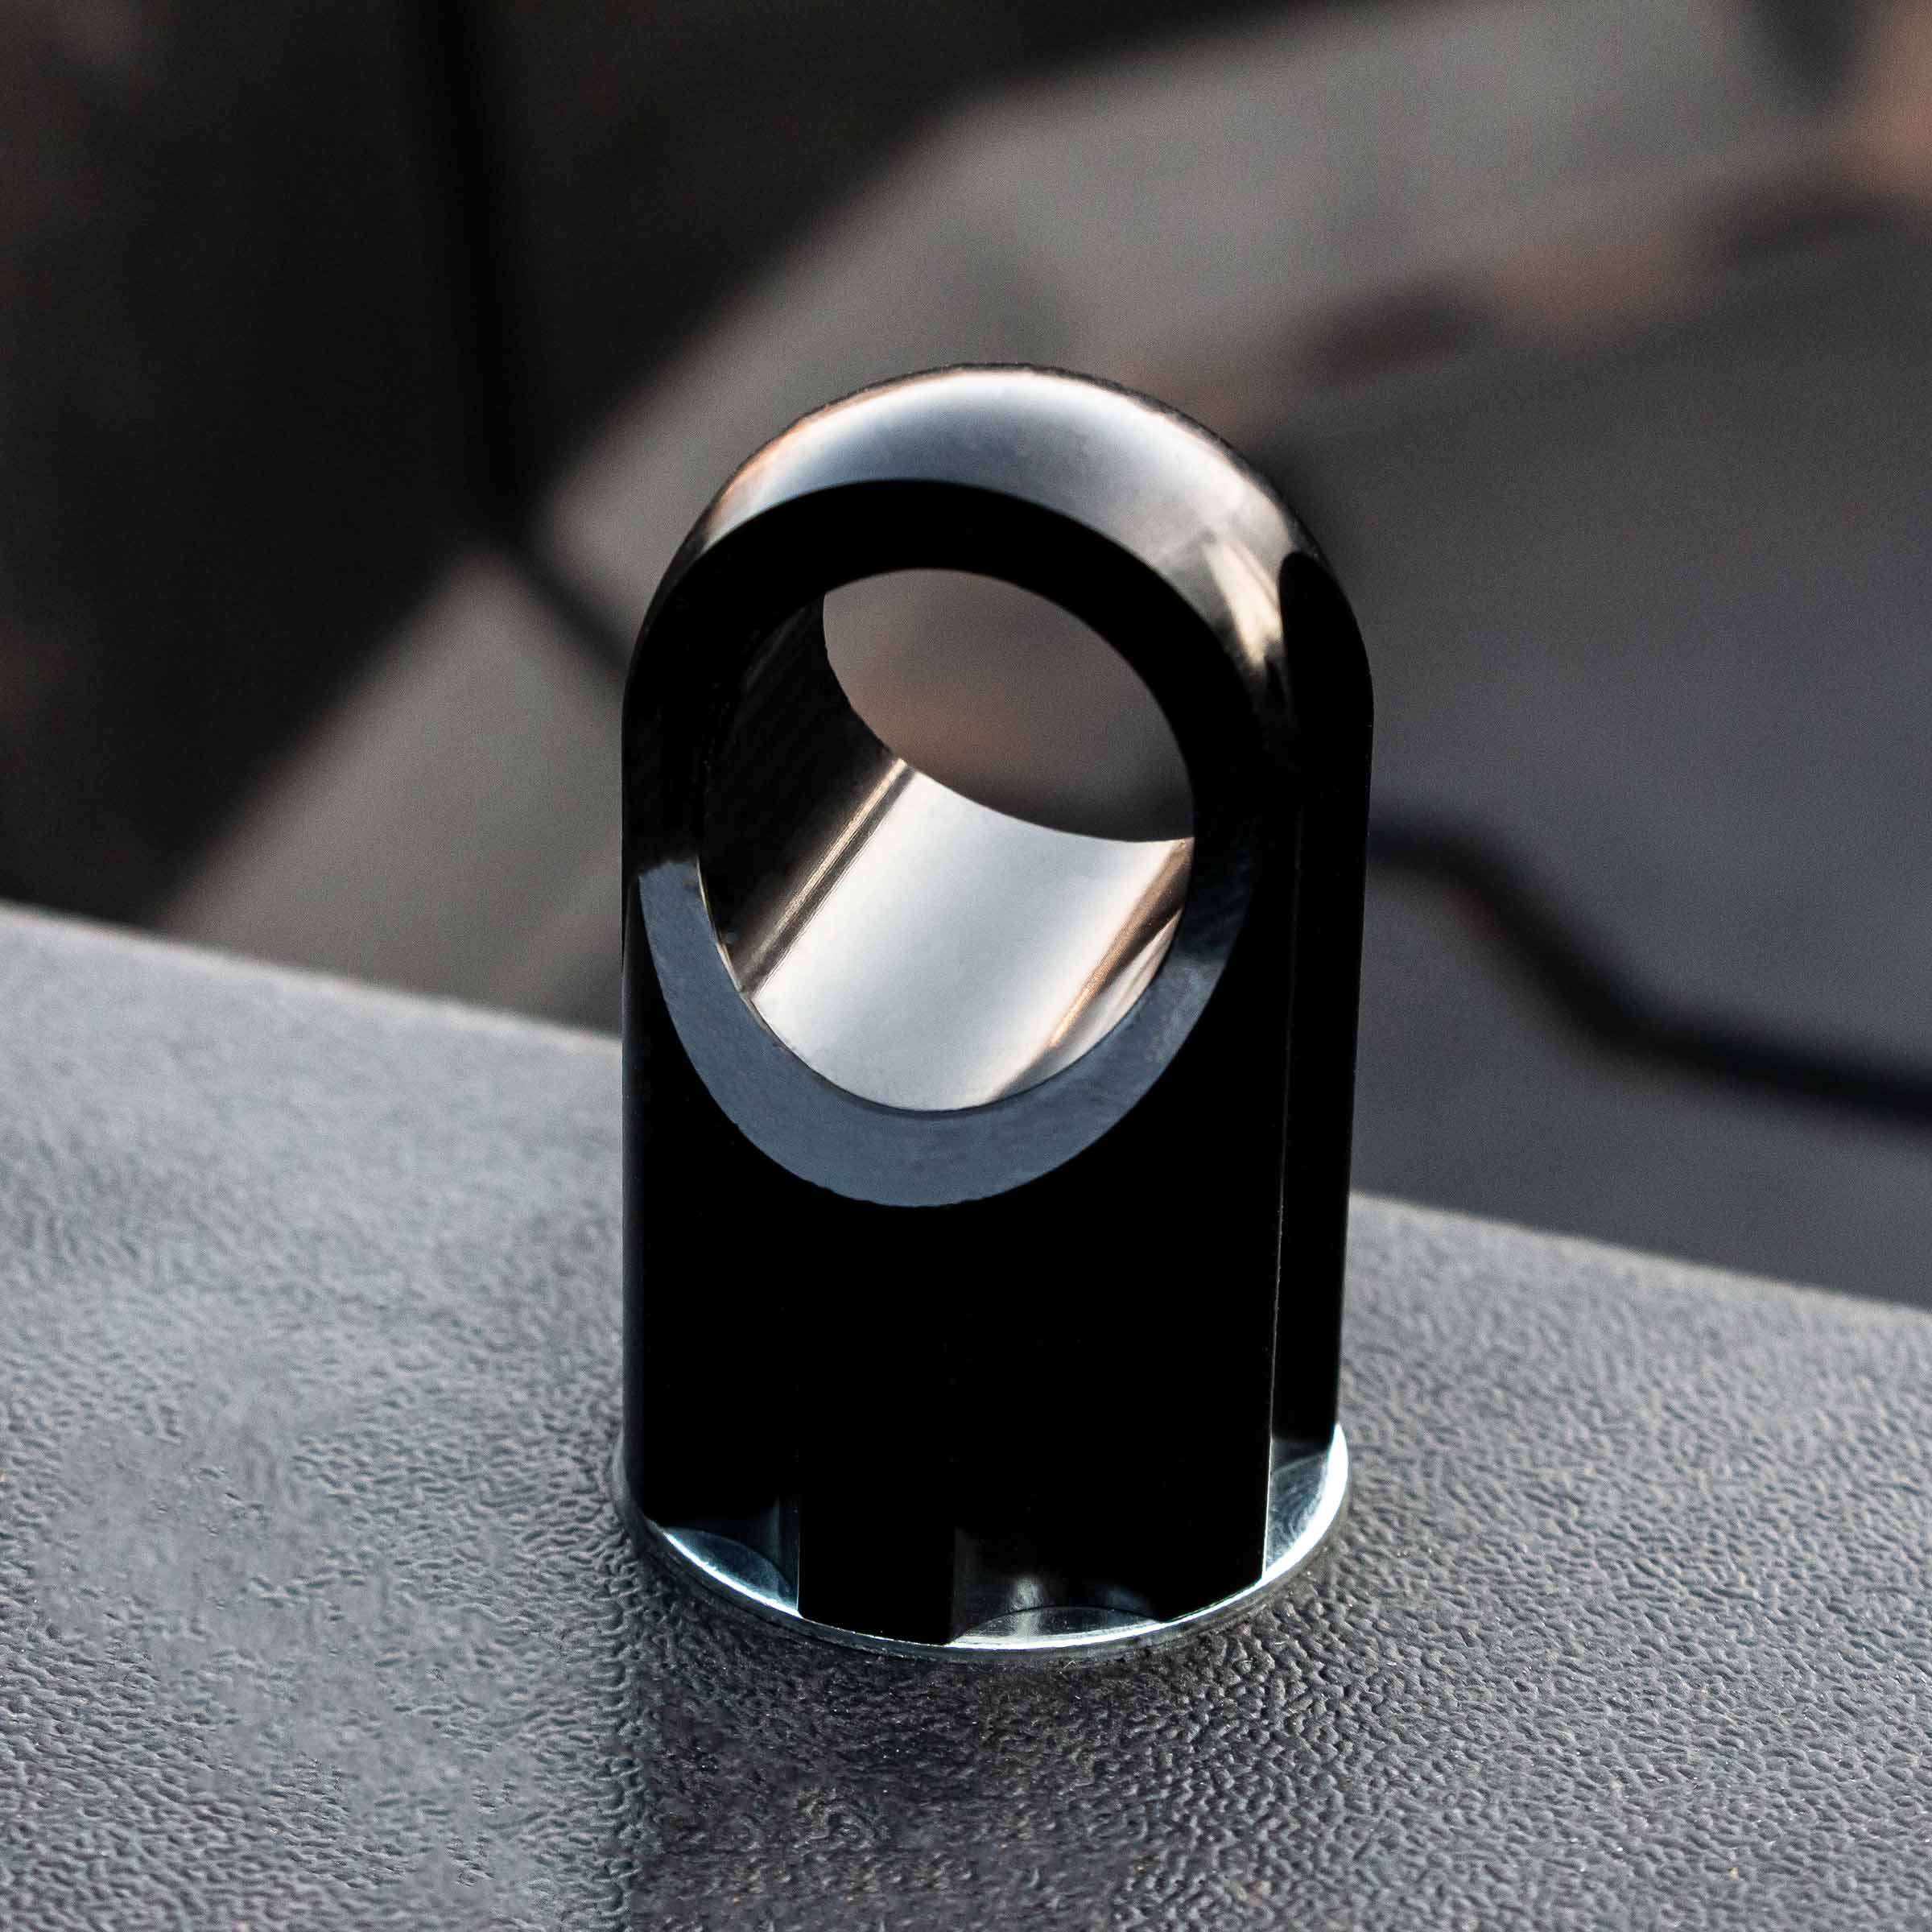 Billet Six Shooter Knob Only for "The Stud" Lock N Rides